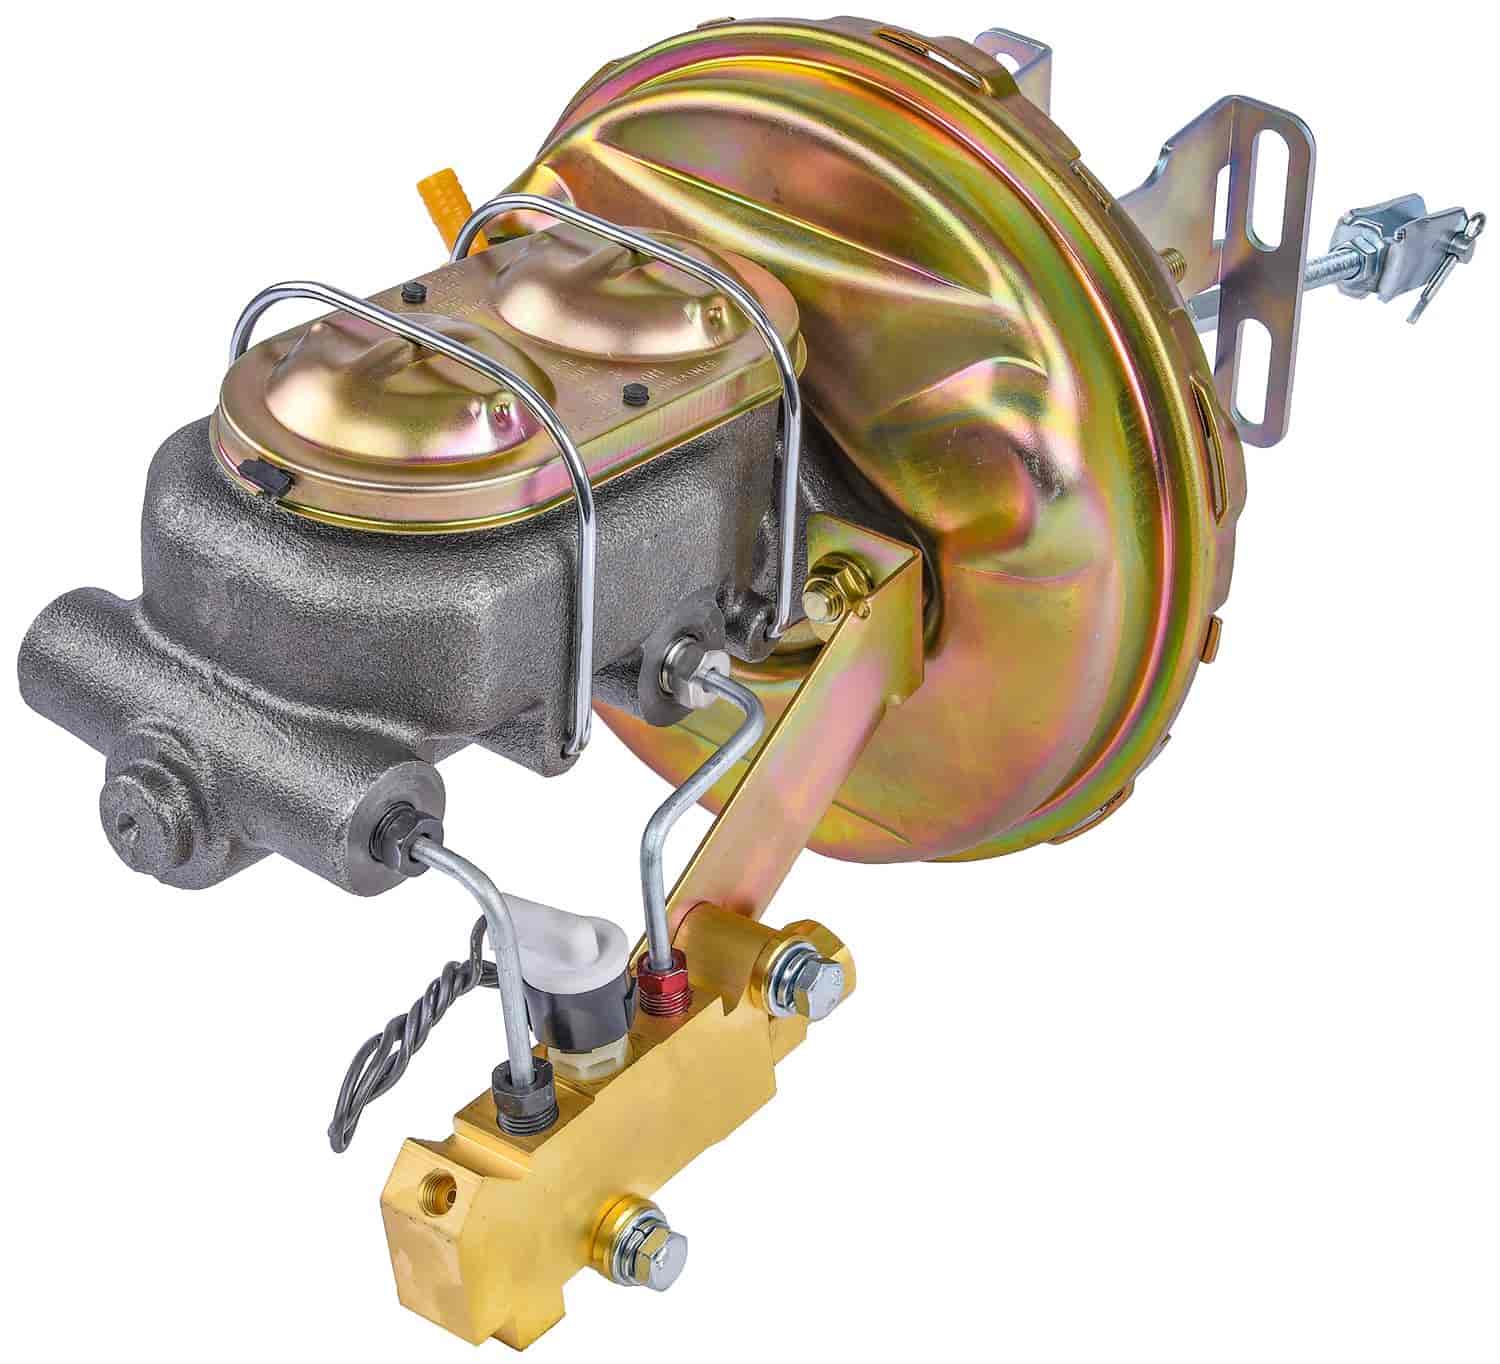 Power Brake Booster Conversion kit for 1959-1970 GM Full Size Cars [Disc/Disc]